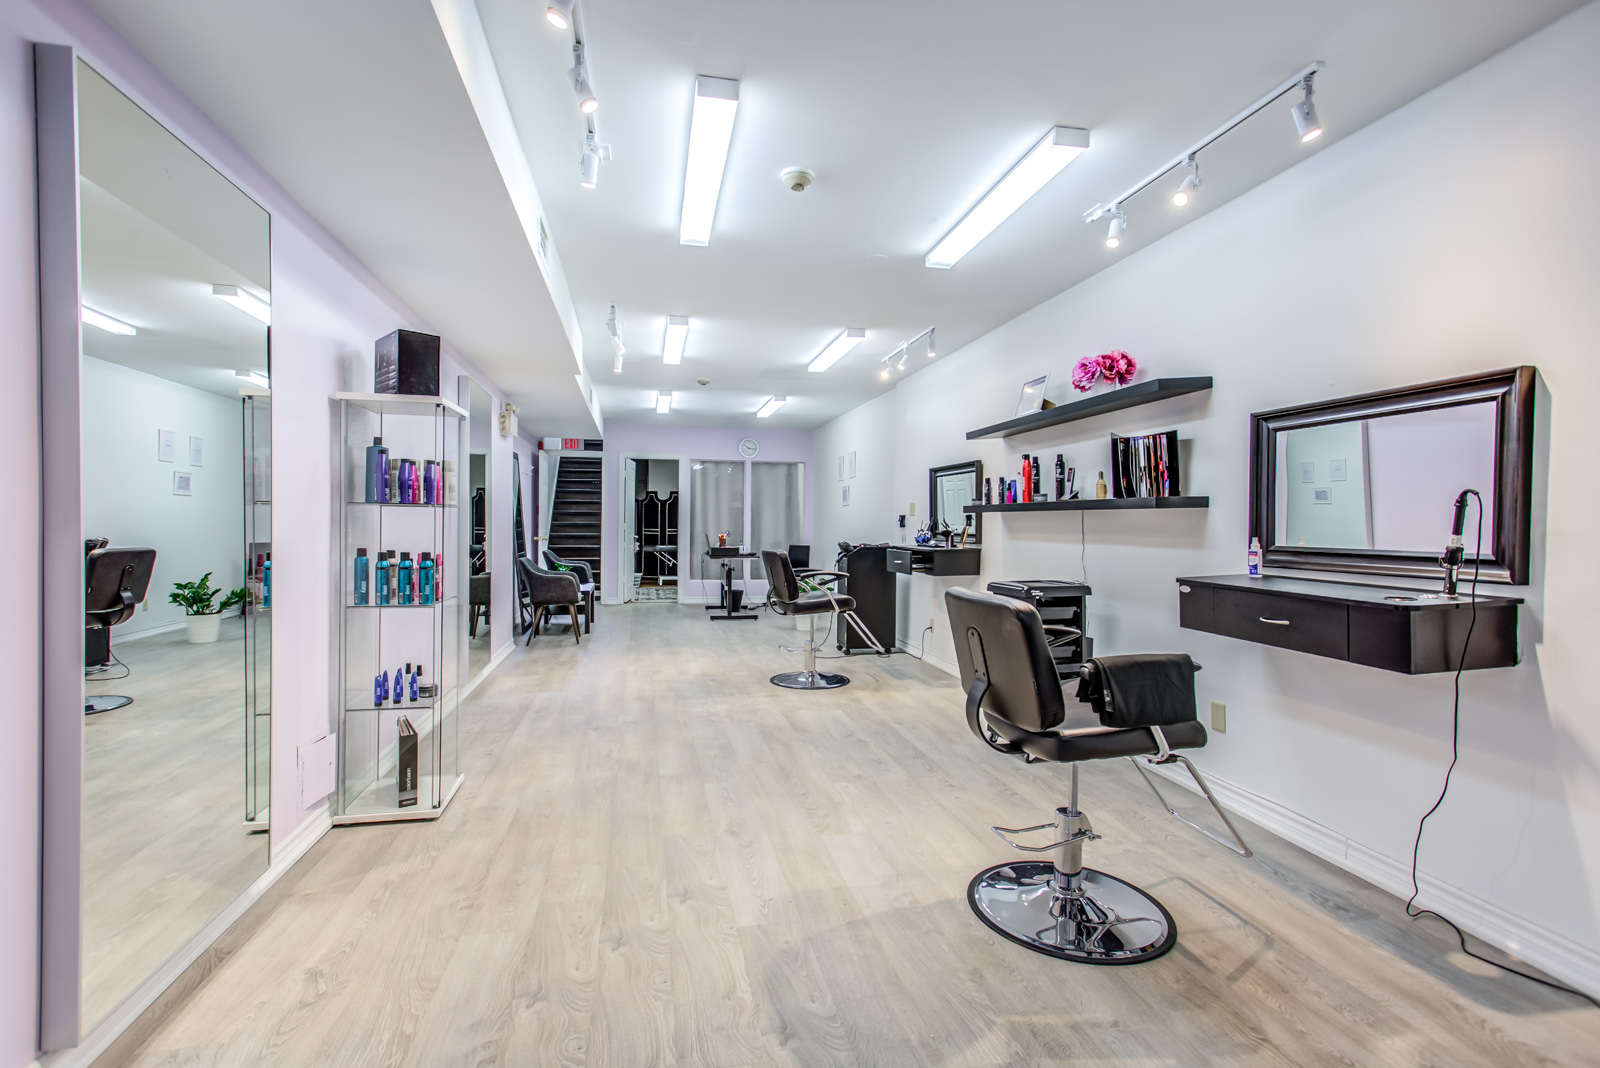 642 queen street west interior; hair salon with styling chairs and other items.